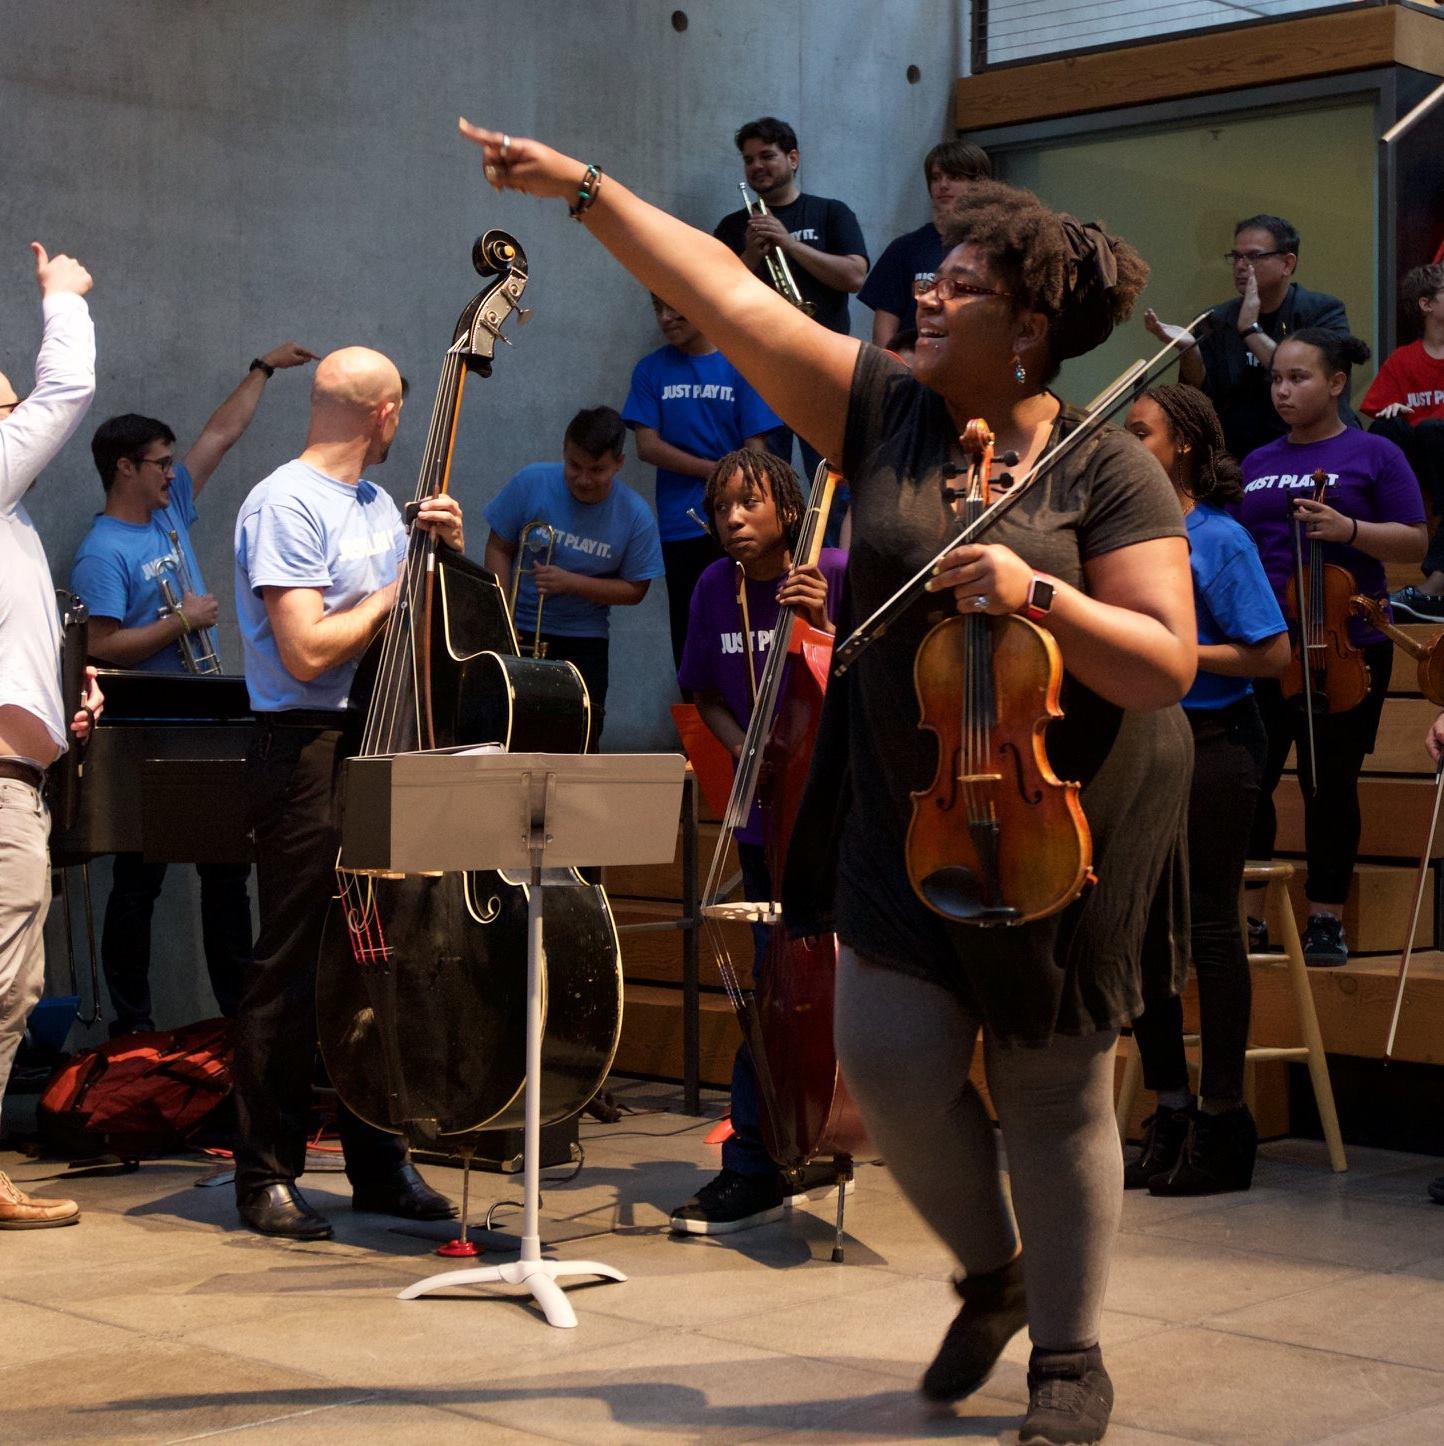 Photo of Ayriole, a brown skinned Black person, wearing a black tunic, grey leggings and black shoes. They stand in a room full of people in bright colored t-shirts, holding string instruments, some on wood risers. Ayriole is pointing and holding a viola.